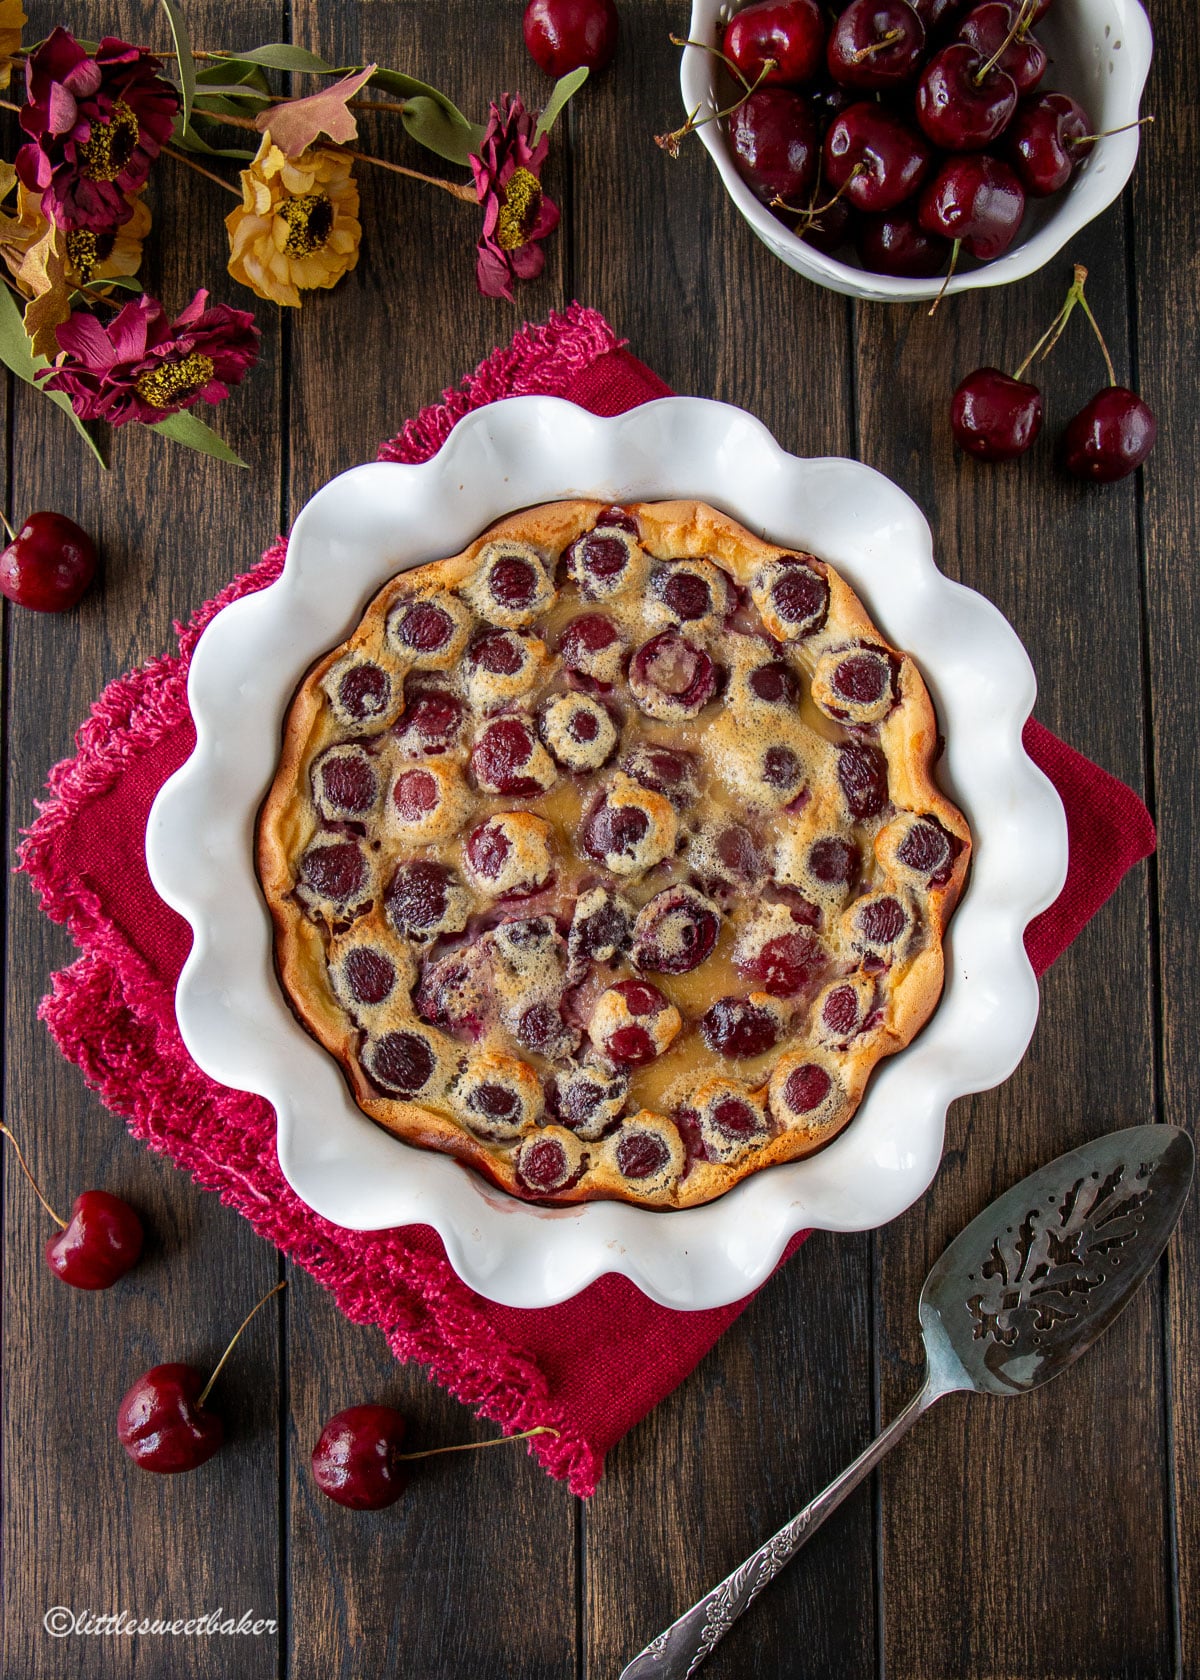 Cherry clafoutis baked in a white pie plate on top of a burgundy napkin.